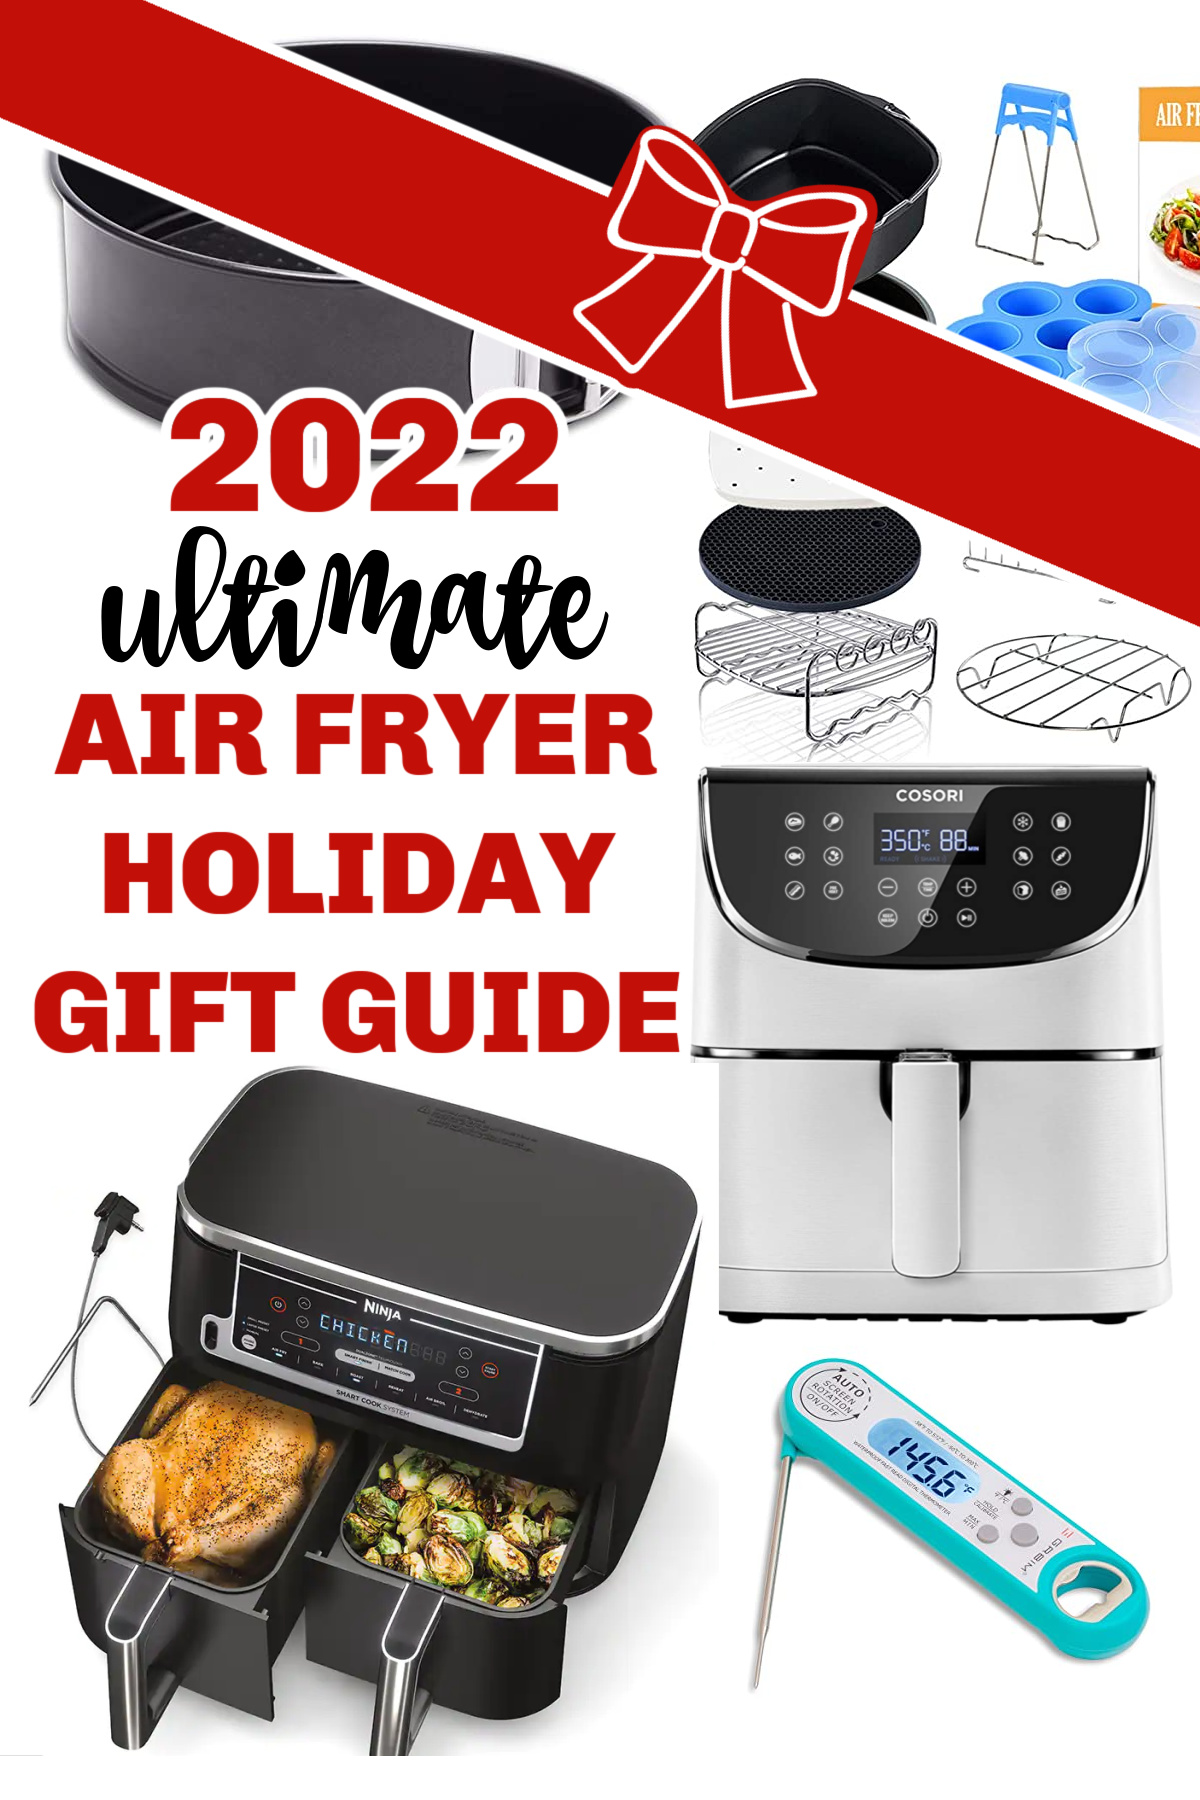 2022 Holiday gift guide with air fryers and accessories.